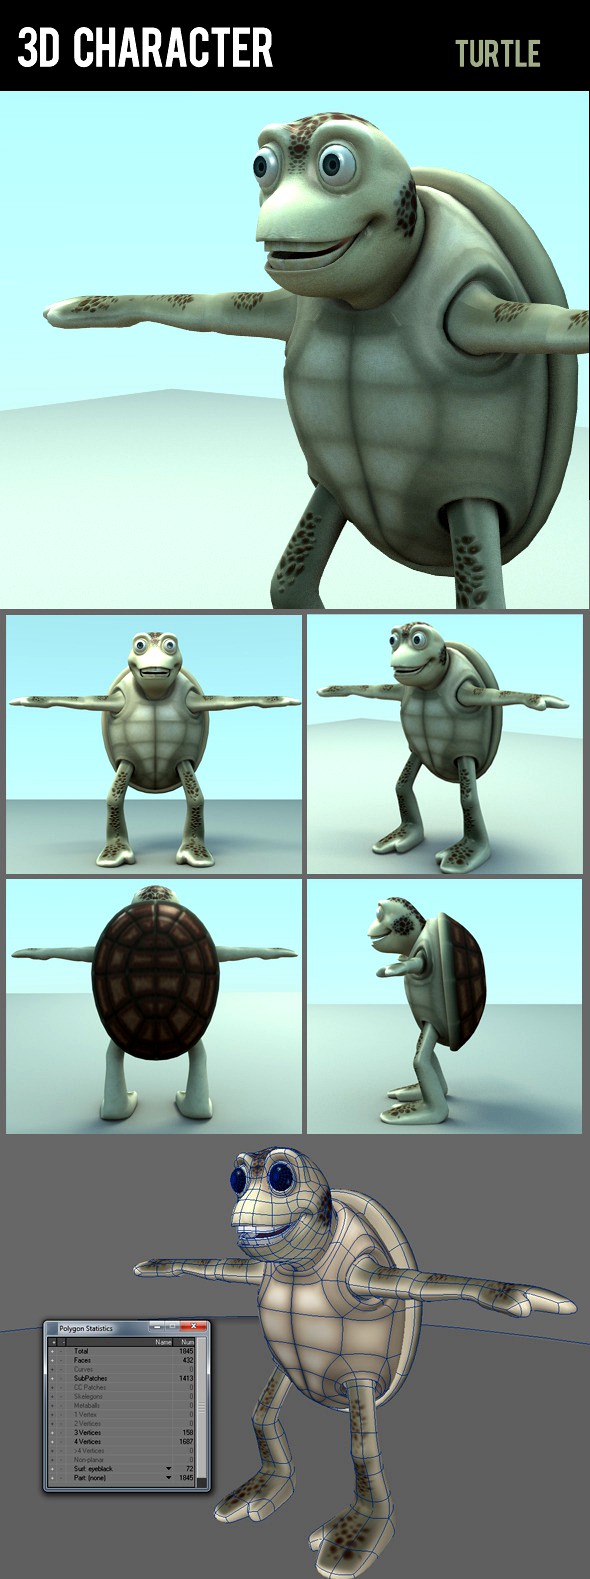 3d character turtle